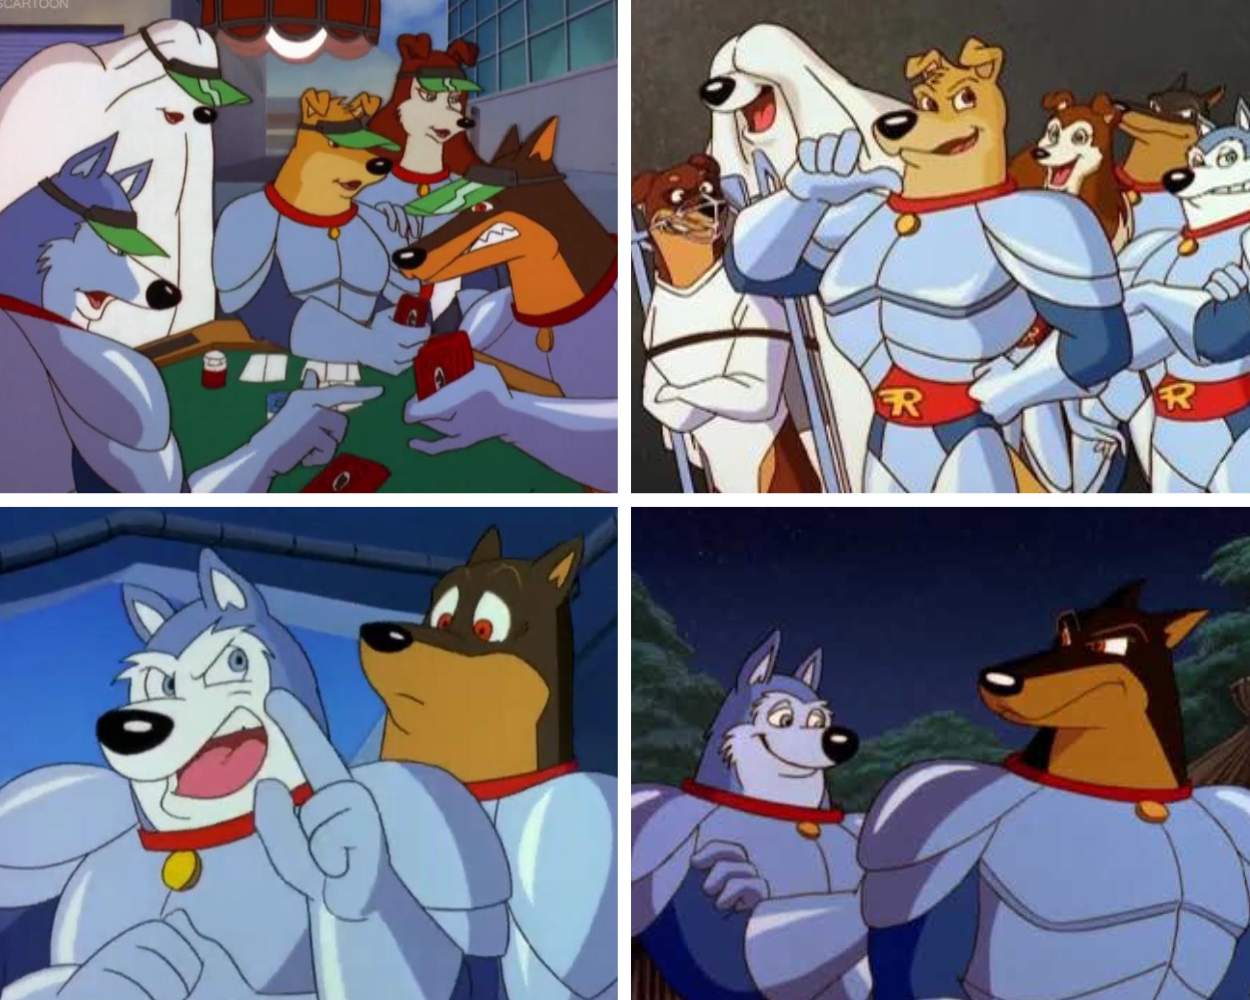 Road Rovers (1996 - 1997)